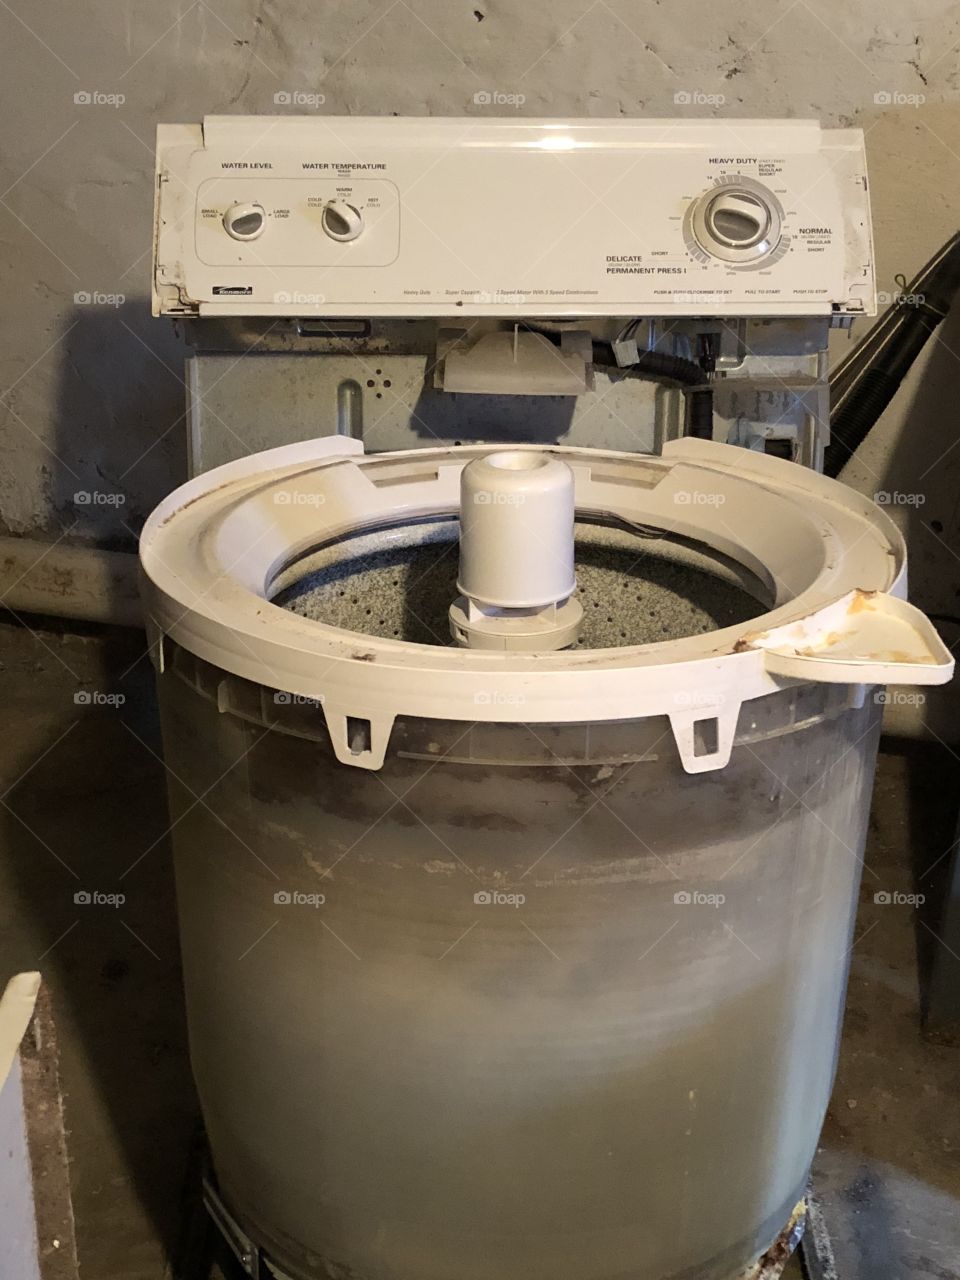 The inside of a washing machine.